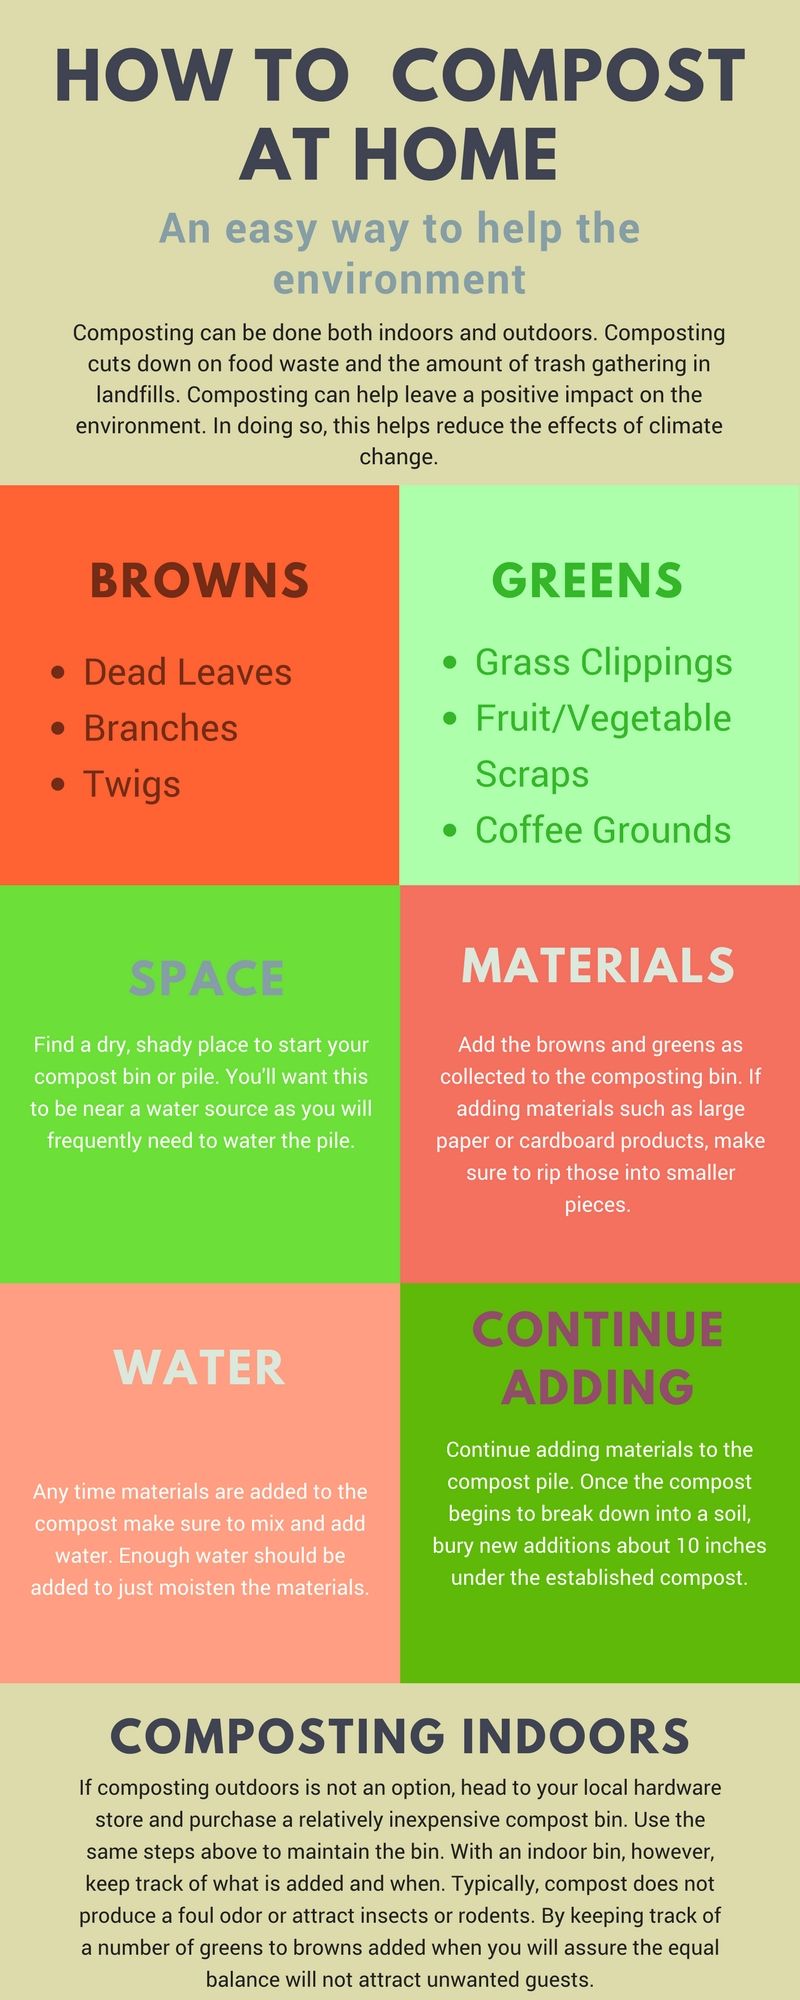 How to compost at home (1)